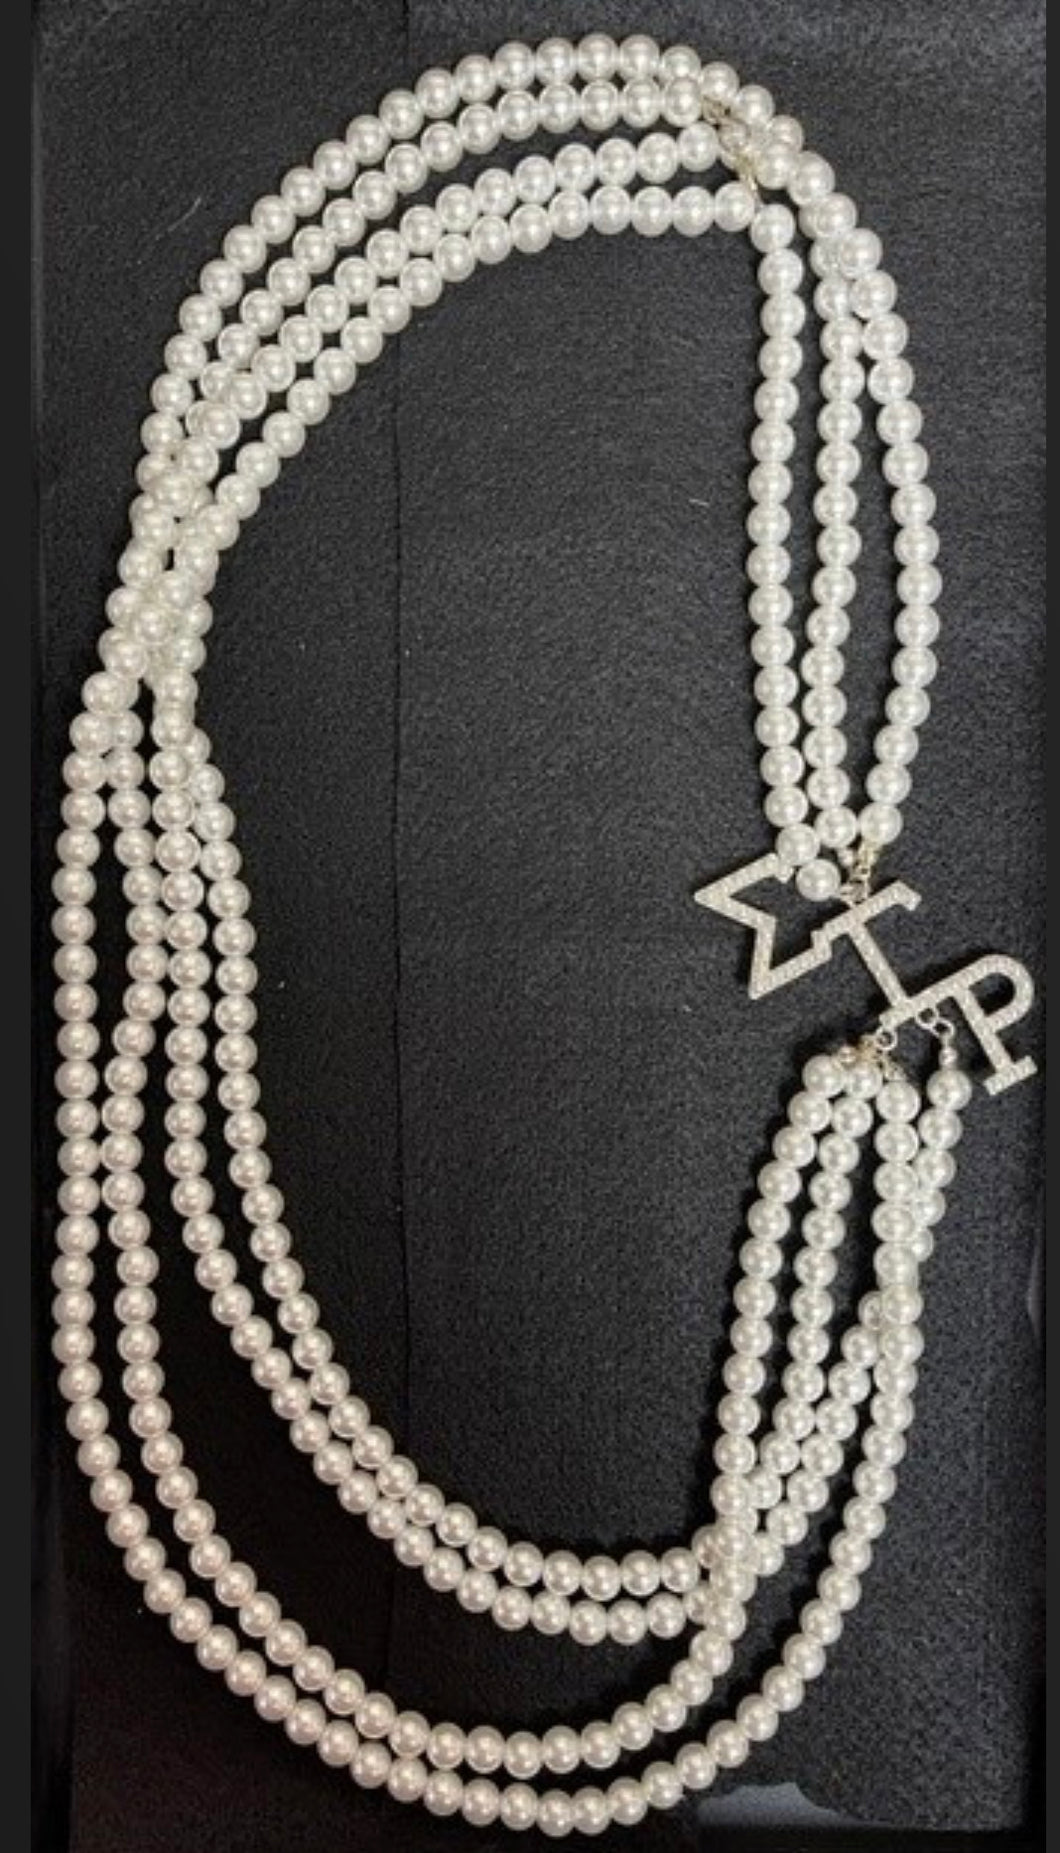 3 Strand Queen's Pearl Necklace 